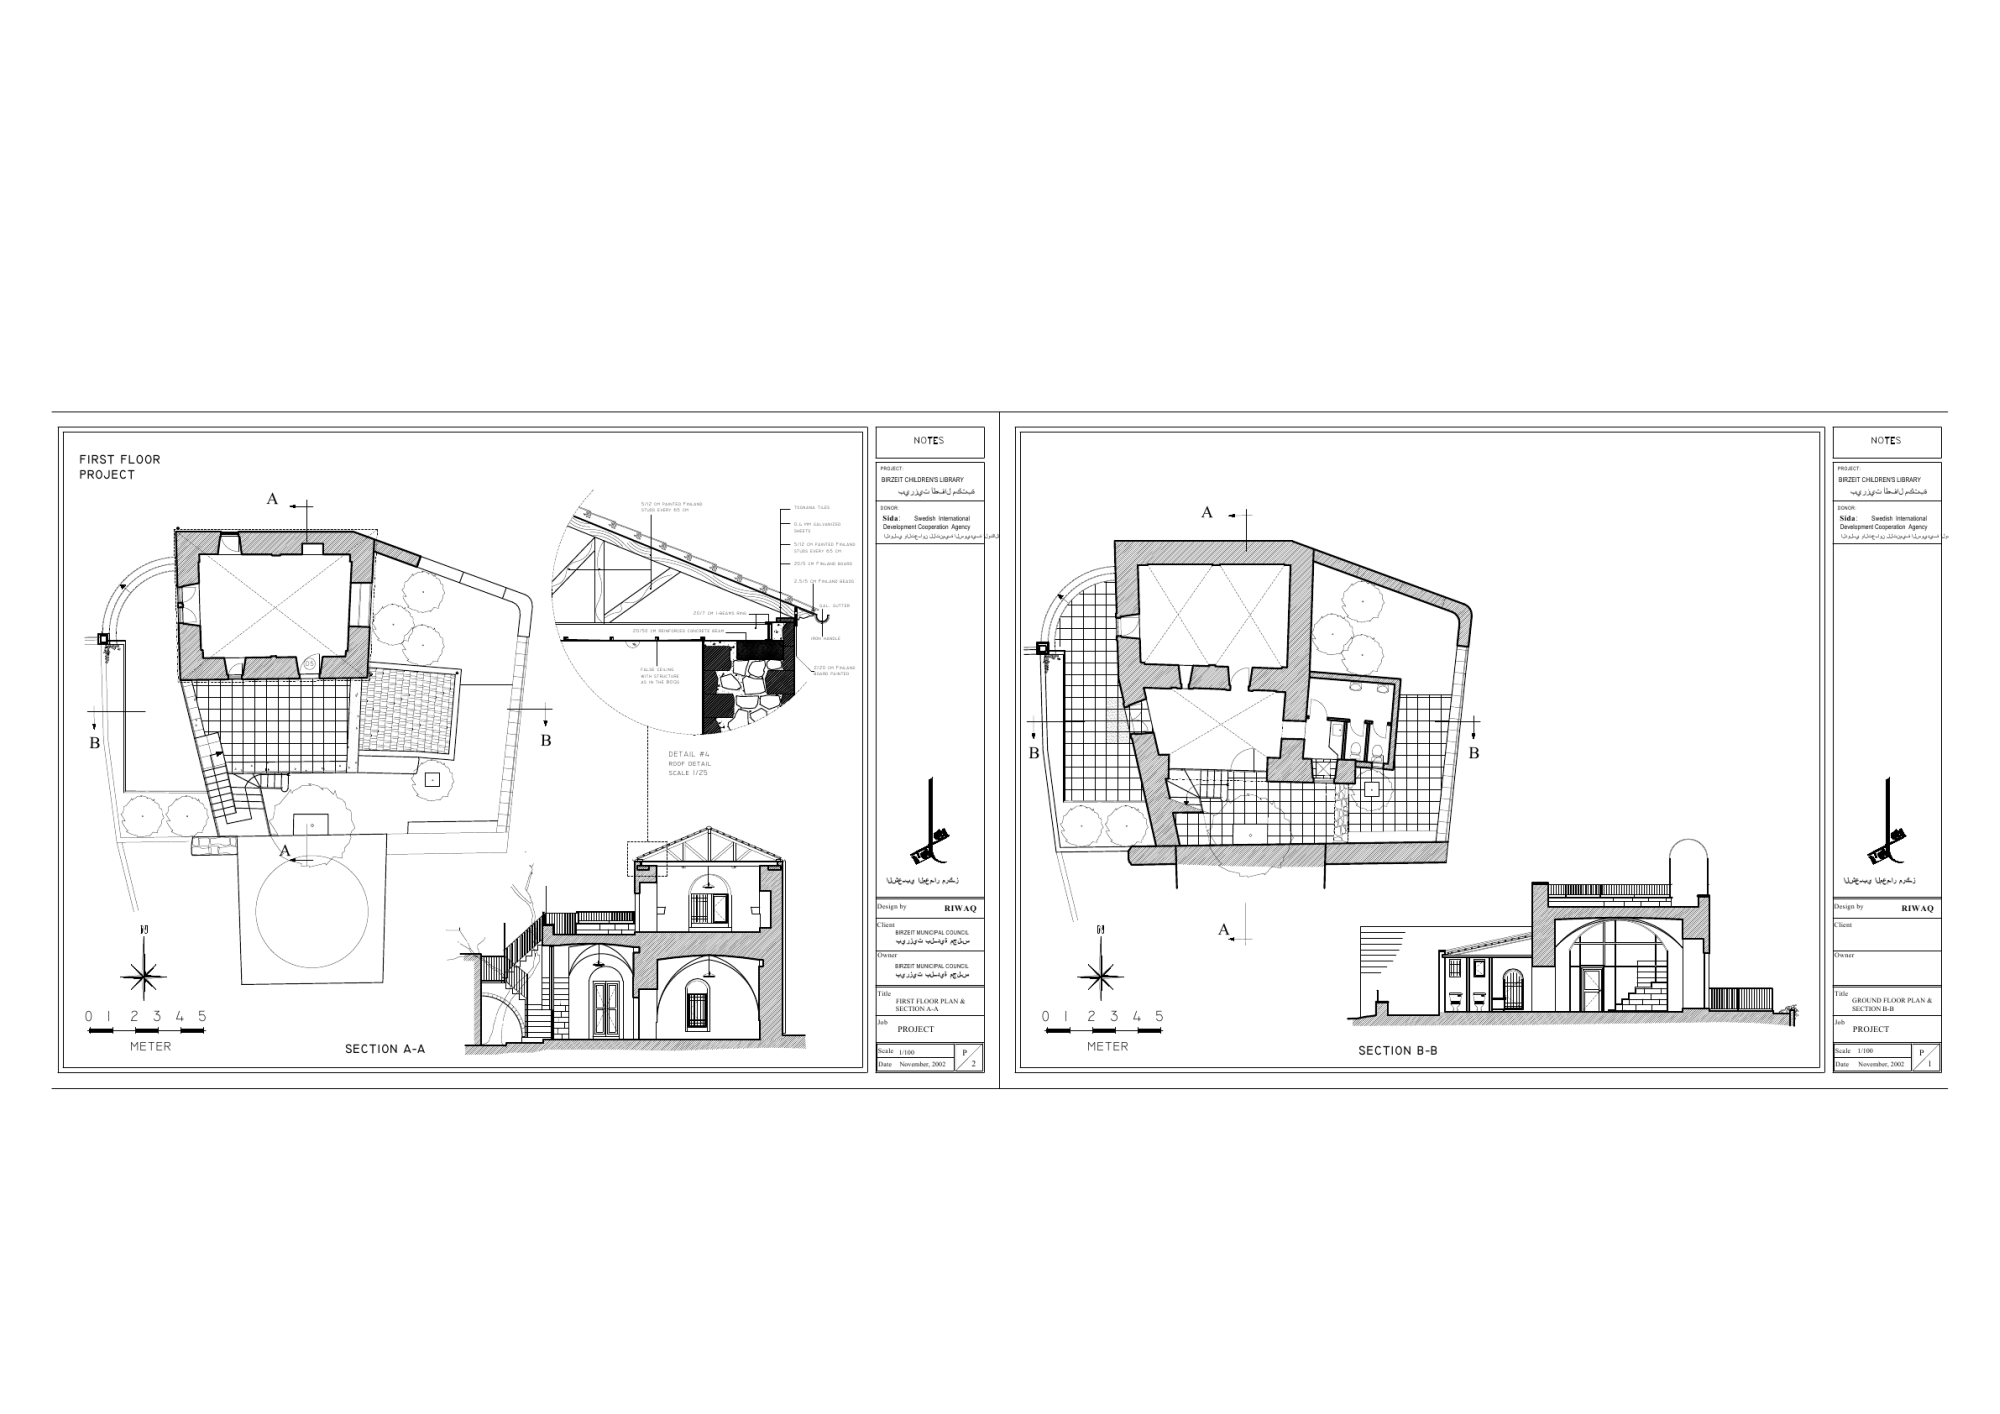 Children's Library Rehabilitation Drawings. CAD drawing converted to image file.